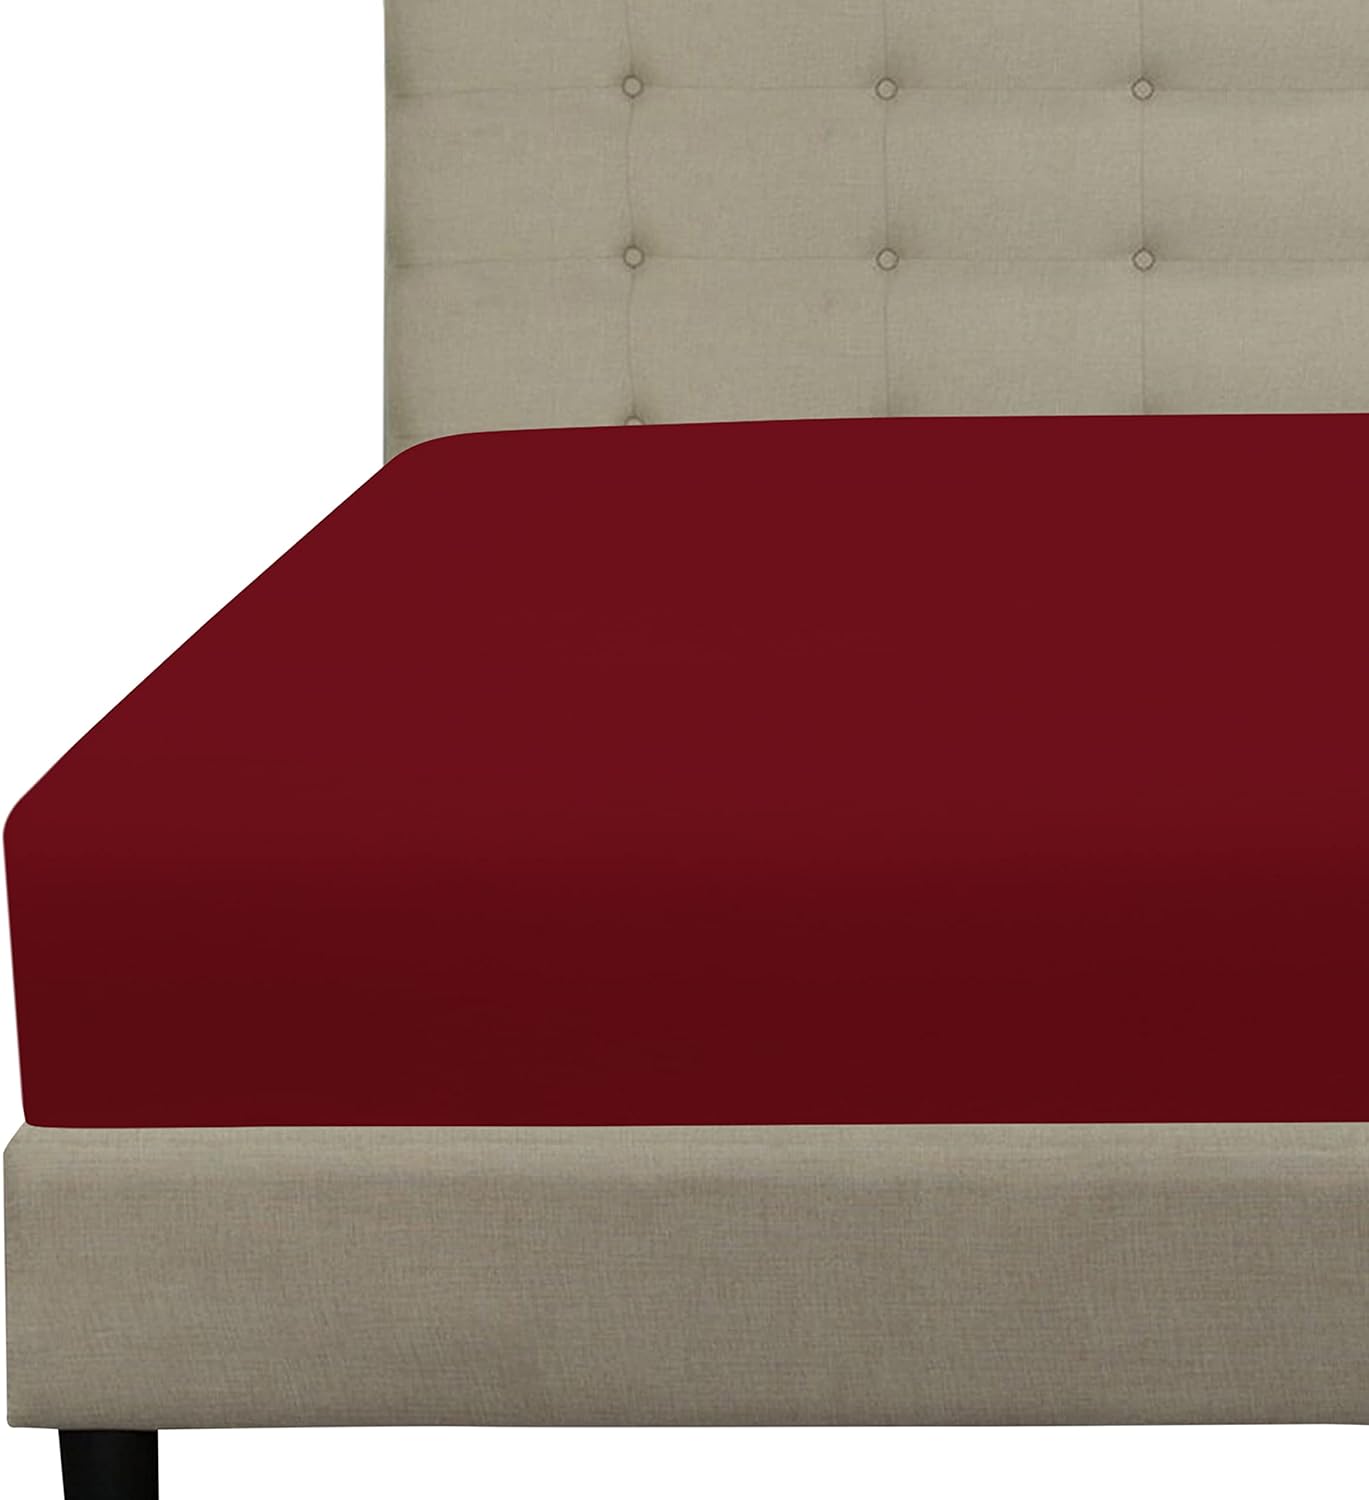 ROYALE LINENS Fitted Sheet Twin - Brushed Hotel Quality 1800 Ultra-Soft Wrinkle & Fade Resistant - Bottom Sheet - Deep Pocket Stretches Up to 16" - Fitted Sheet Only - Elastic Sheet (Twin, Burgundy)